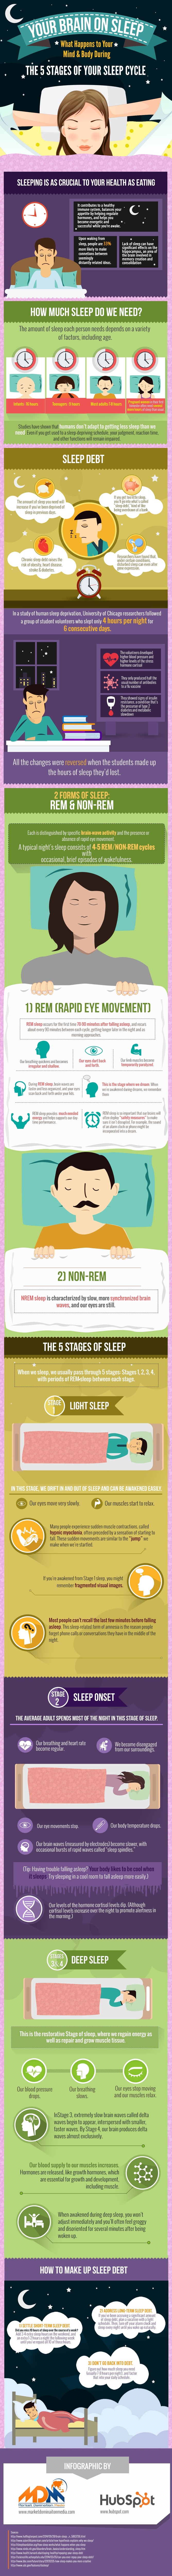 Your Brain on Sleep: What Happens to the Mind and Body During the 5 Stages of Your Sleep Cycle [Infographic]